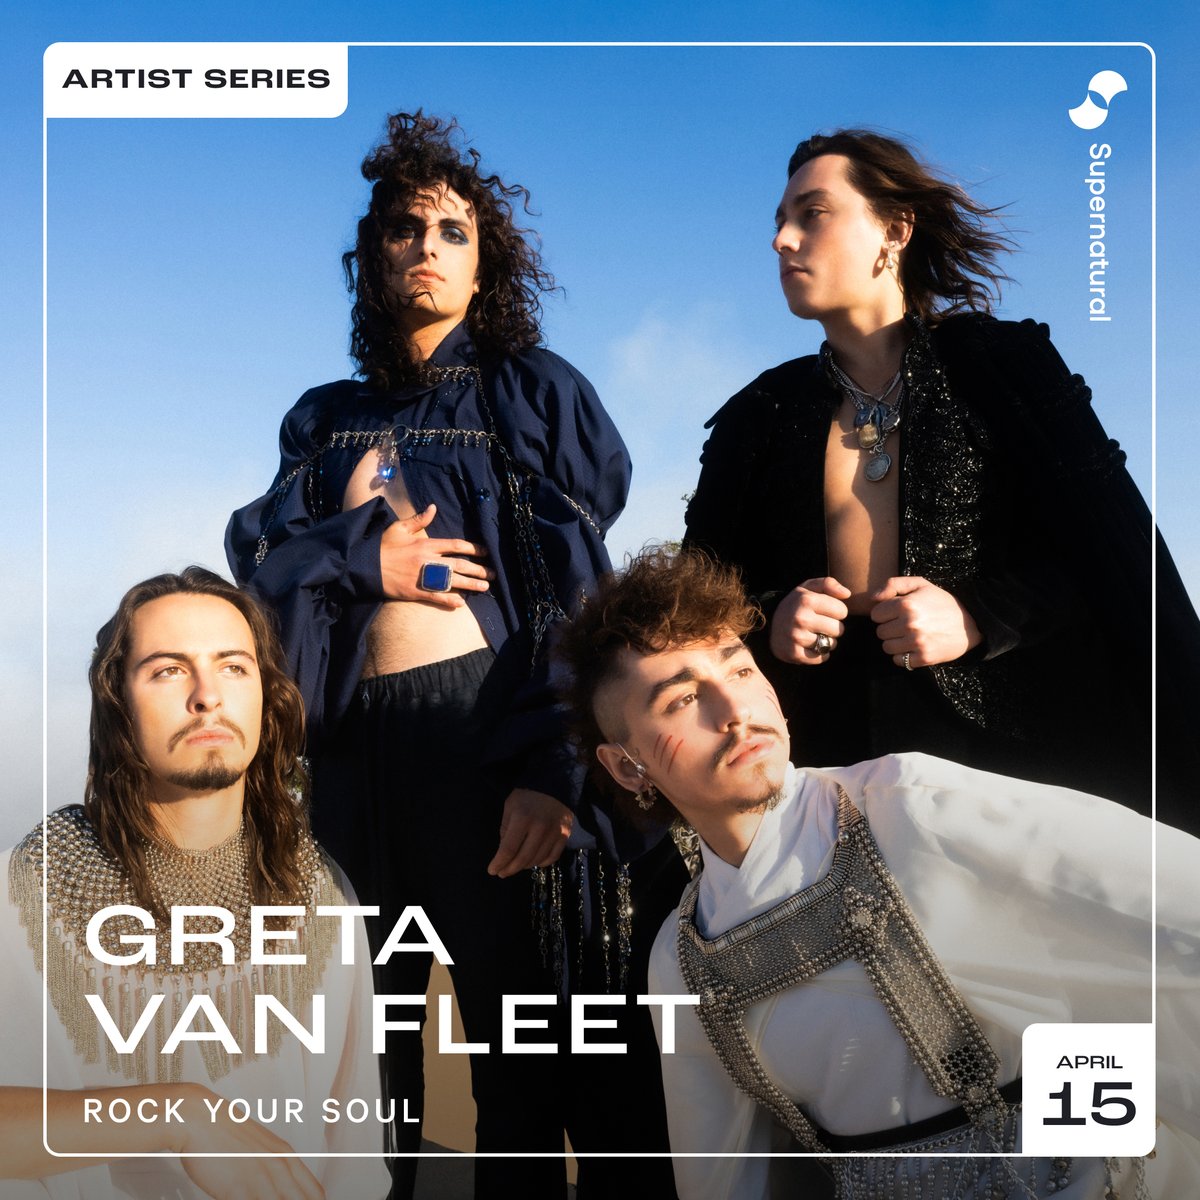 Ready to rock out to the electrifying and soaring songs of @GretaVanFleet? Catch the latest Artist Series drop to Box and Flow alongside Coaches Doc and Leanne. Available in headset now.